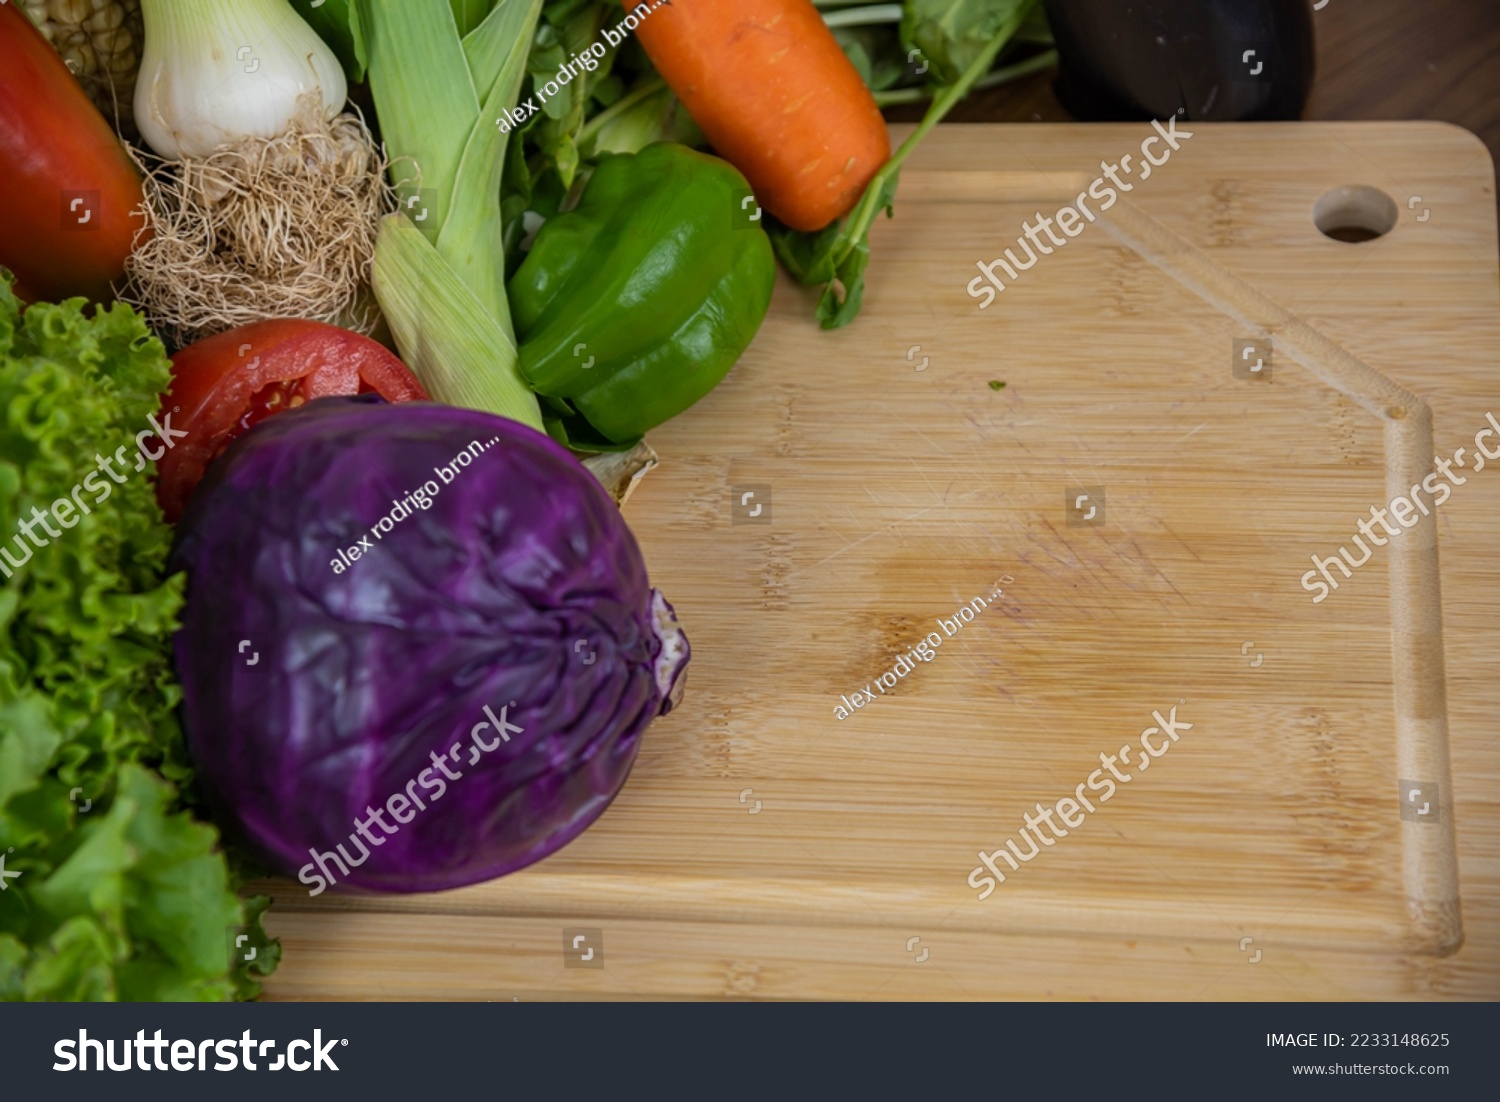 Vegetables on a chopping board. Ingredients for salads. Natural food. Vegetables for human use and consumption. Healthy eating. Vegetables and salads. #2233148625